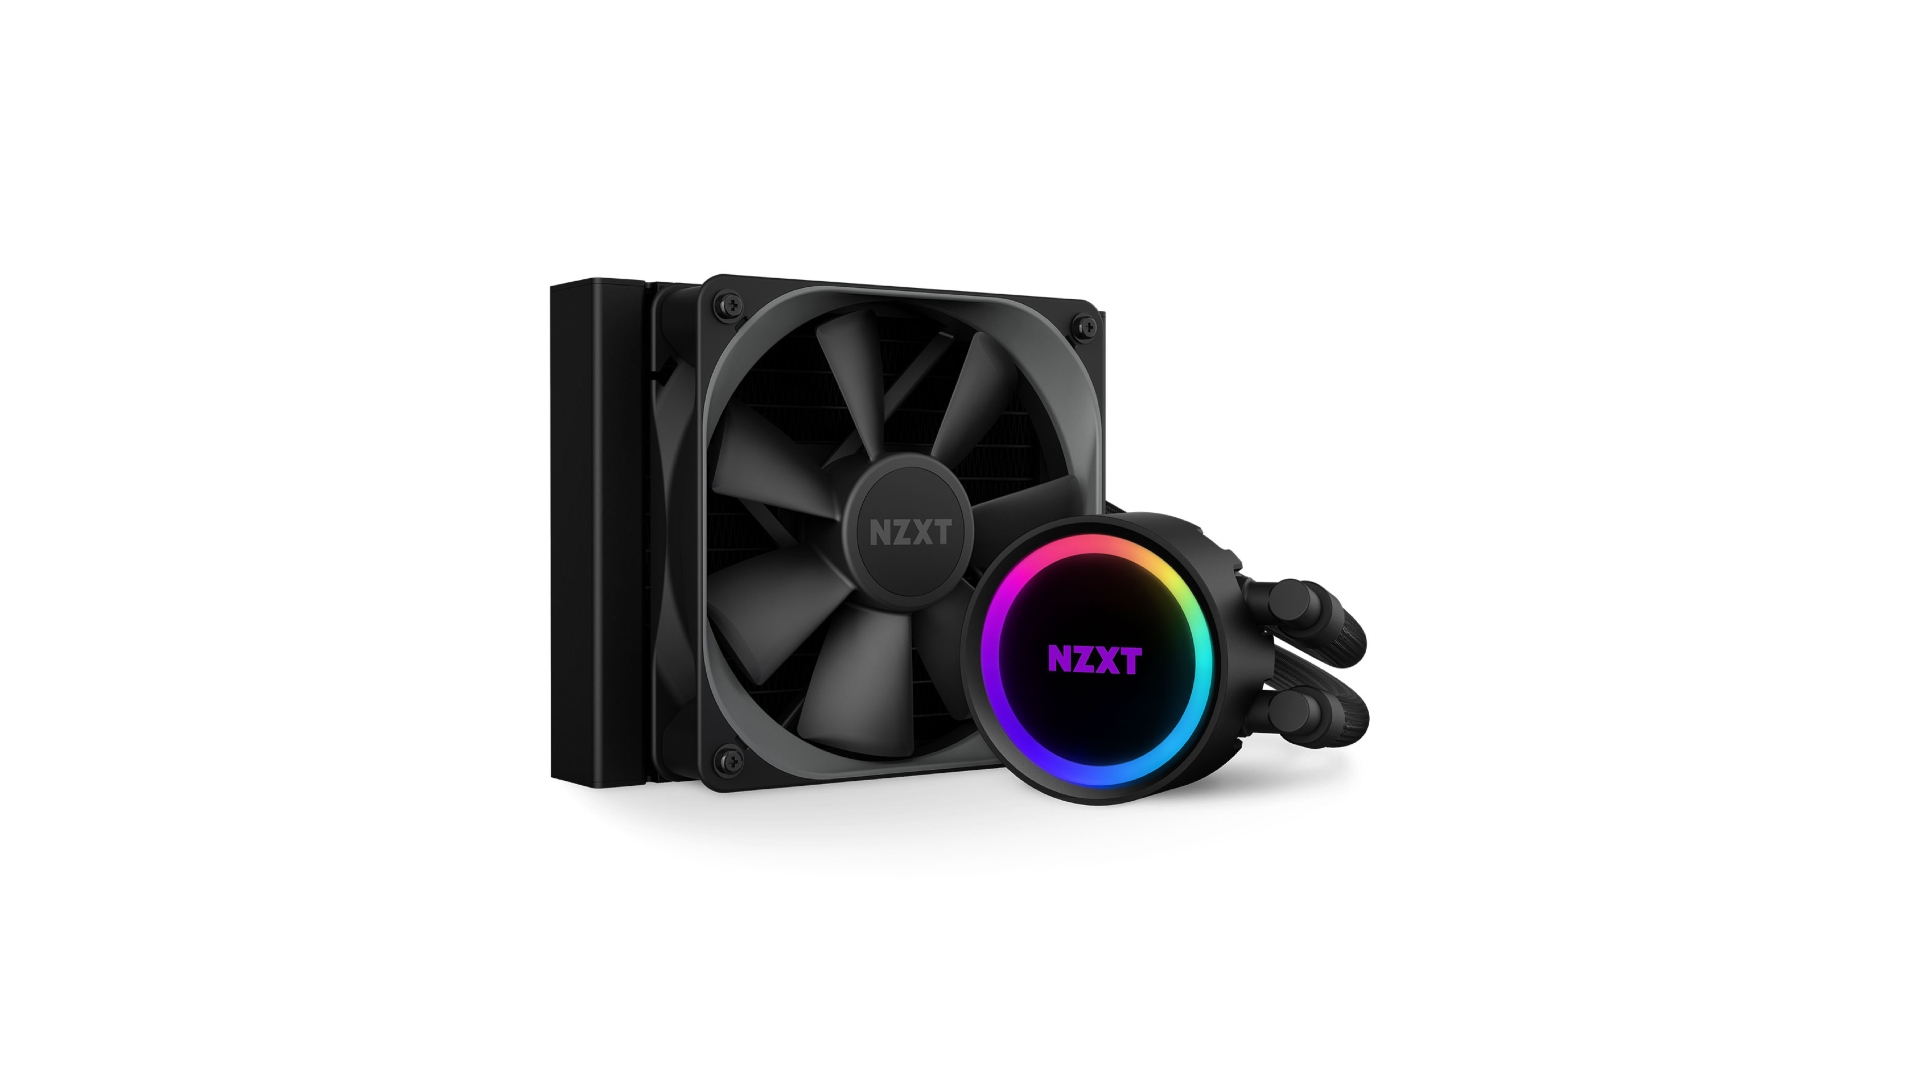 Get a Cooler Master 240mm AIO Cooler With RGB Fans for Just $50